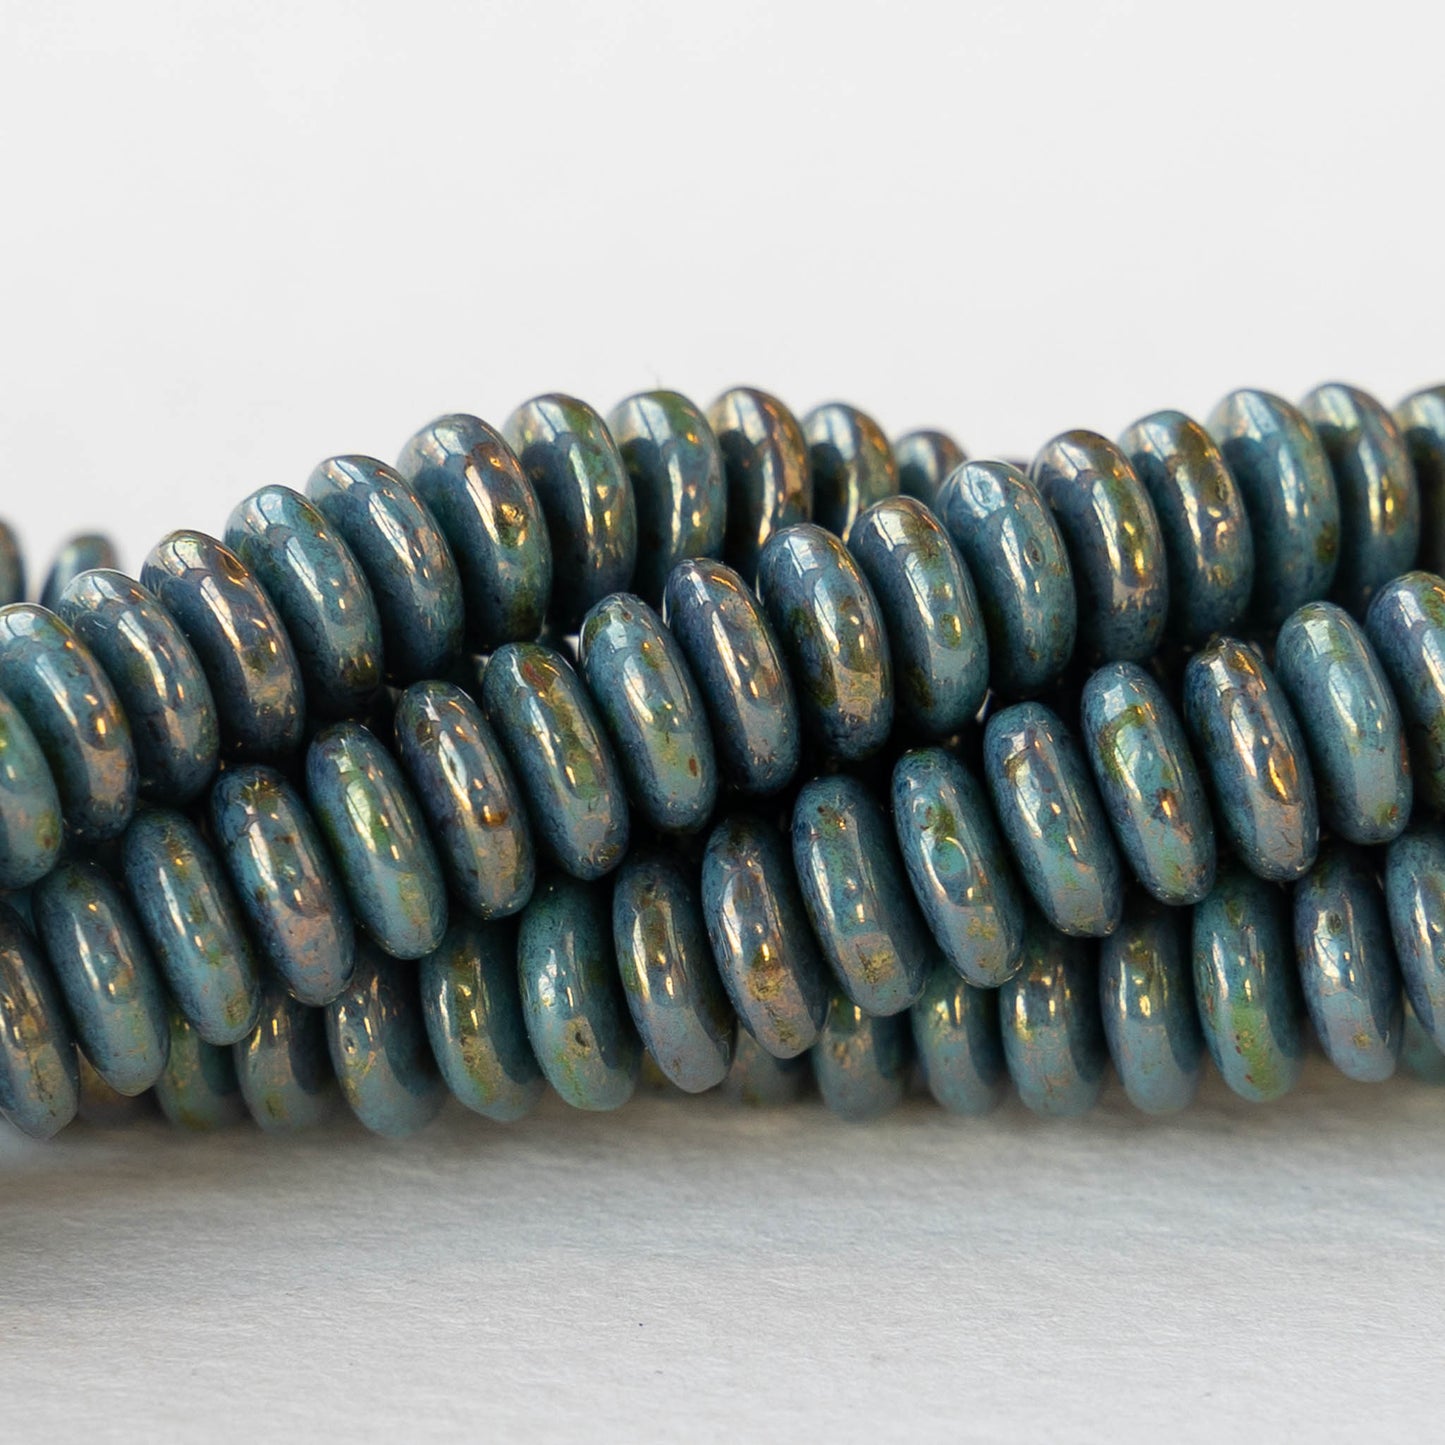 6mm Rondelle Beads - Turquoise Bronze - 50 Beads